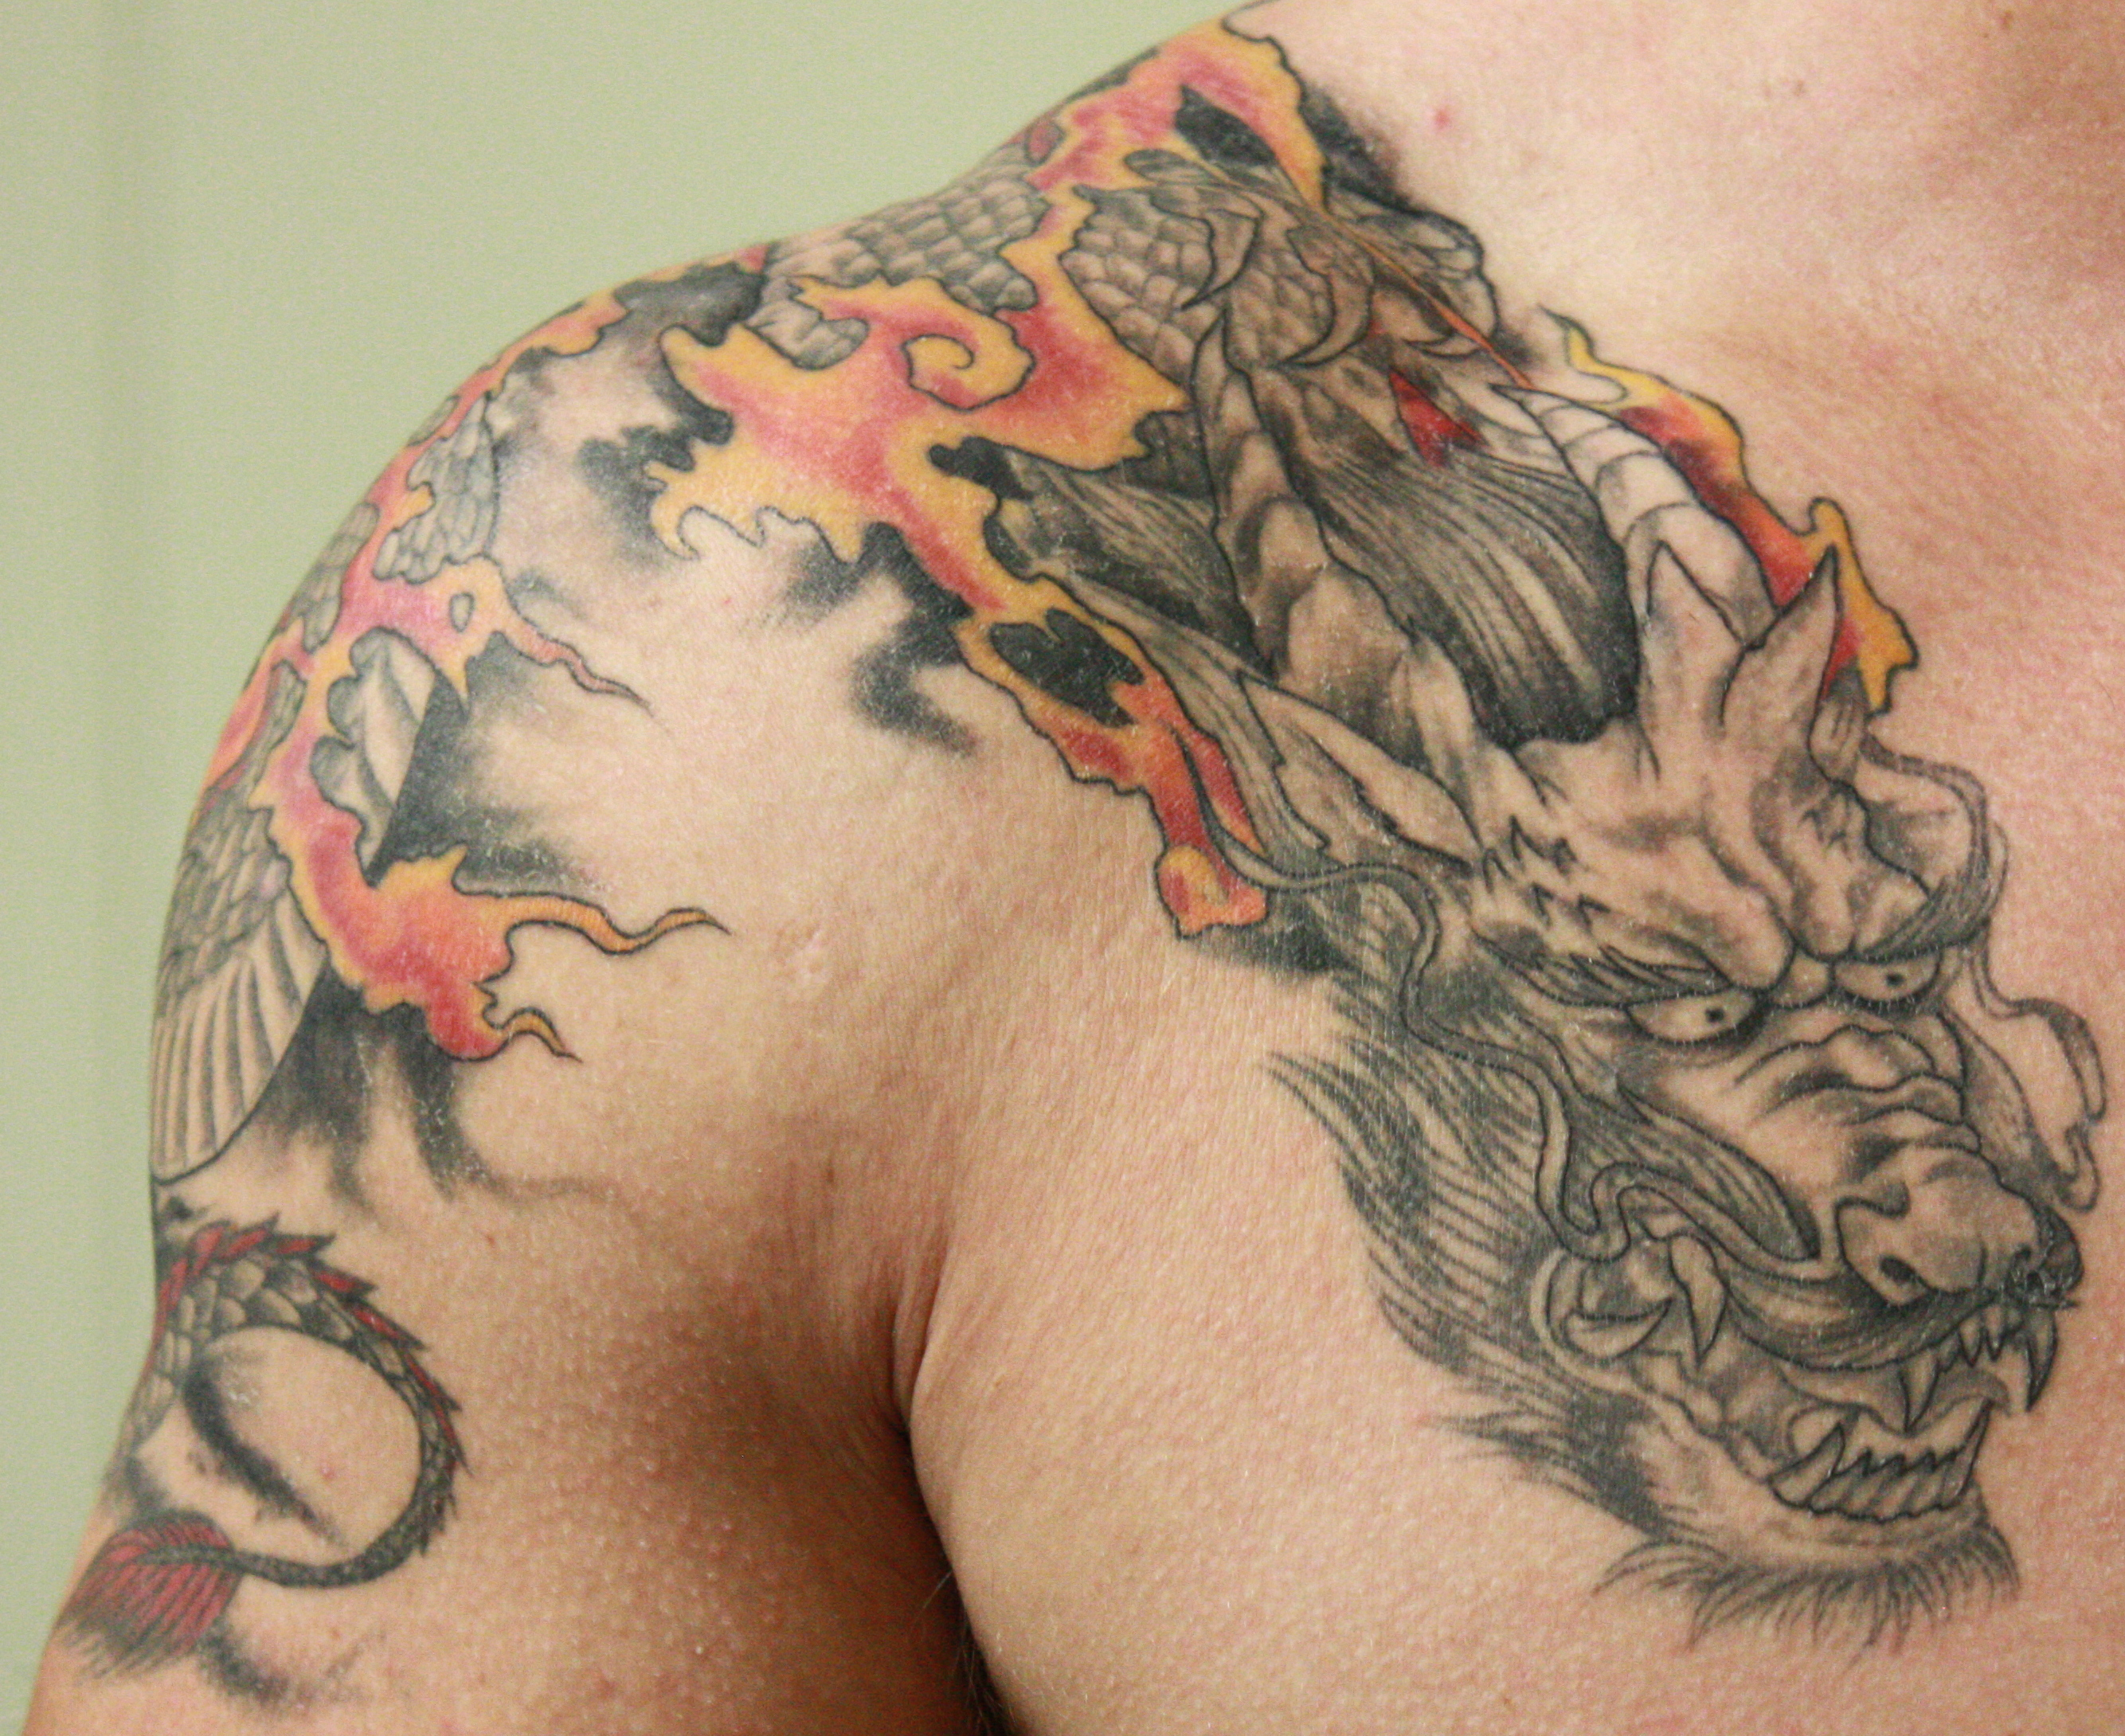 Nothing Says You Like a Tattoo NIST Workshop Considers Ways to Improve  Tattoo Recognition  NIST